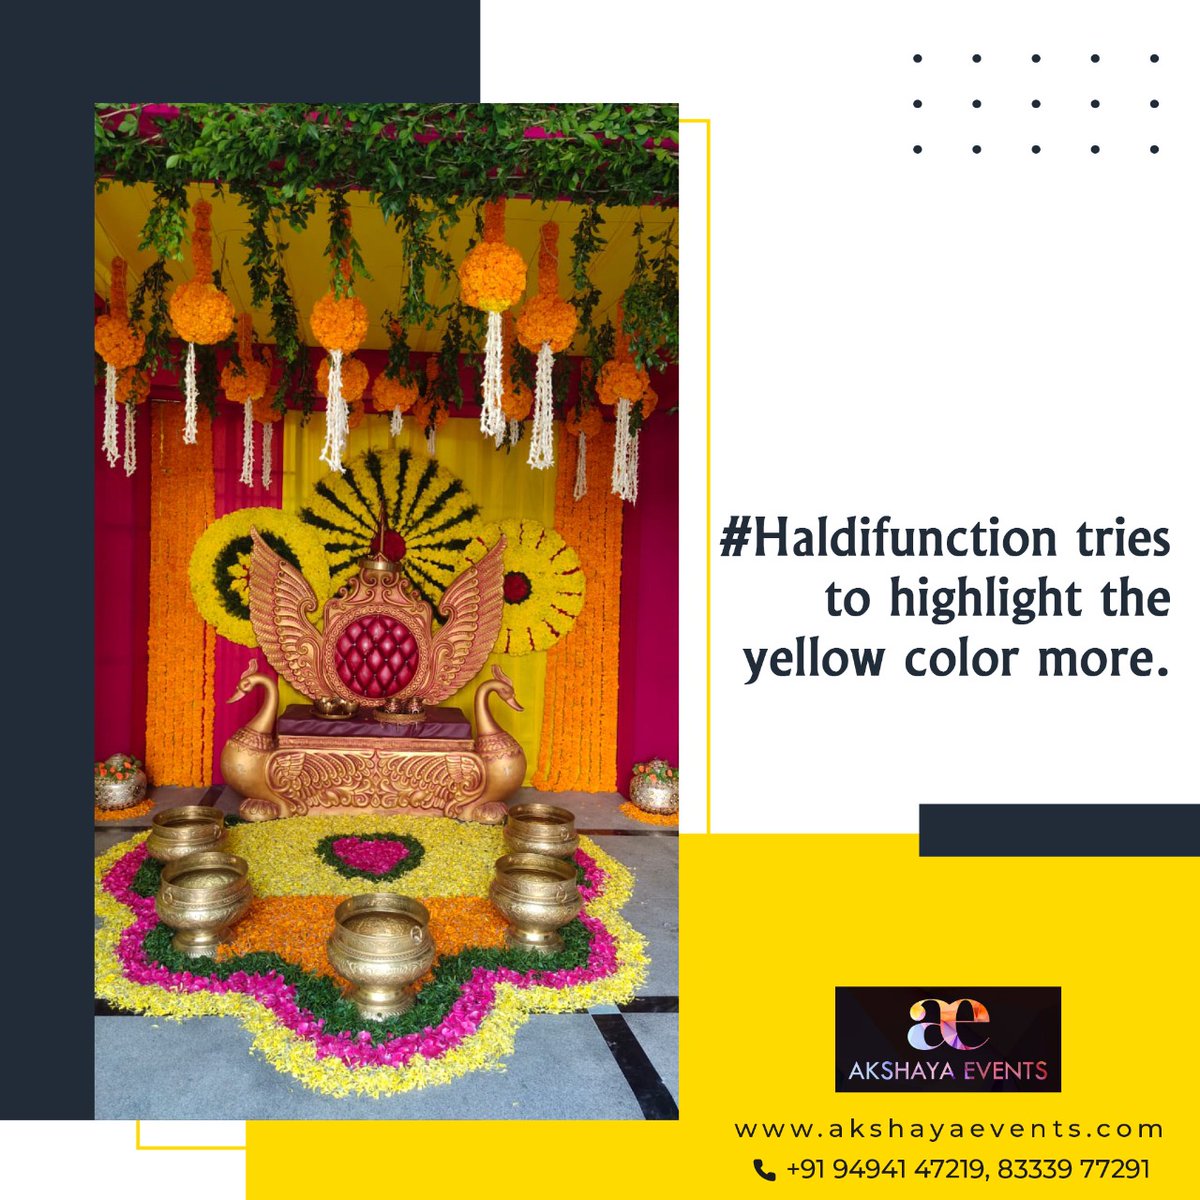 #Haldifunction tries to highlight the yellow color more.

 Contact: +91- 9494147219, 8333977291
#weddingplanning #WeddingPlannerInHyderabad #TopWeddingPlannersInHyderabad #AkshayaEvents  #Eventplannerinhyderabad #weddingreceptiondecoration #receptiondecoration #wedding #EVENT